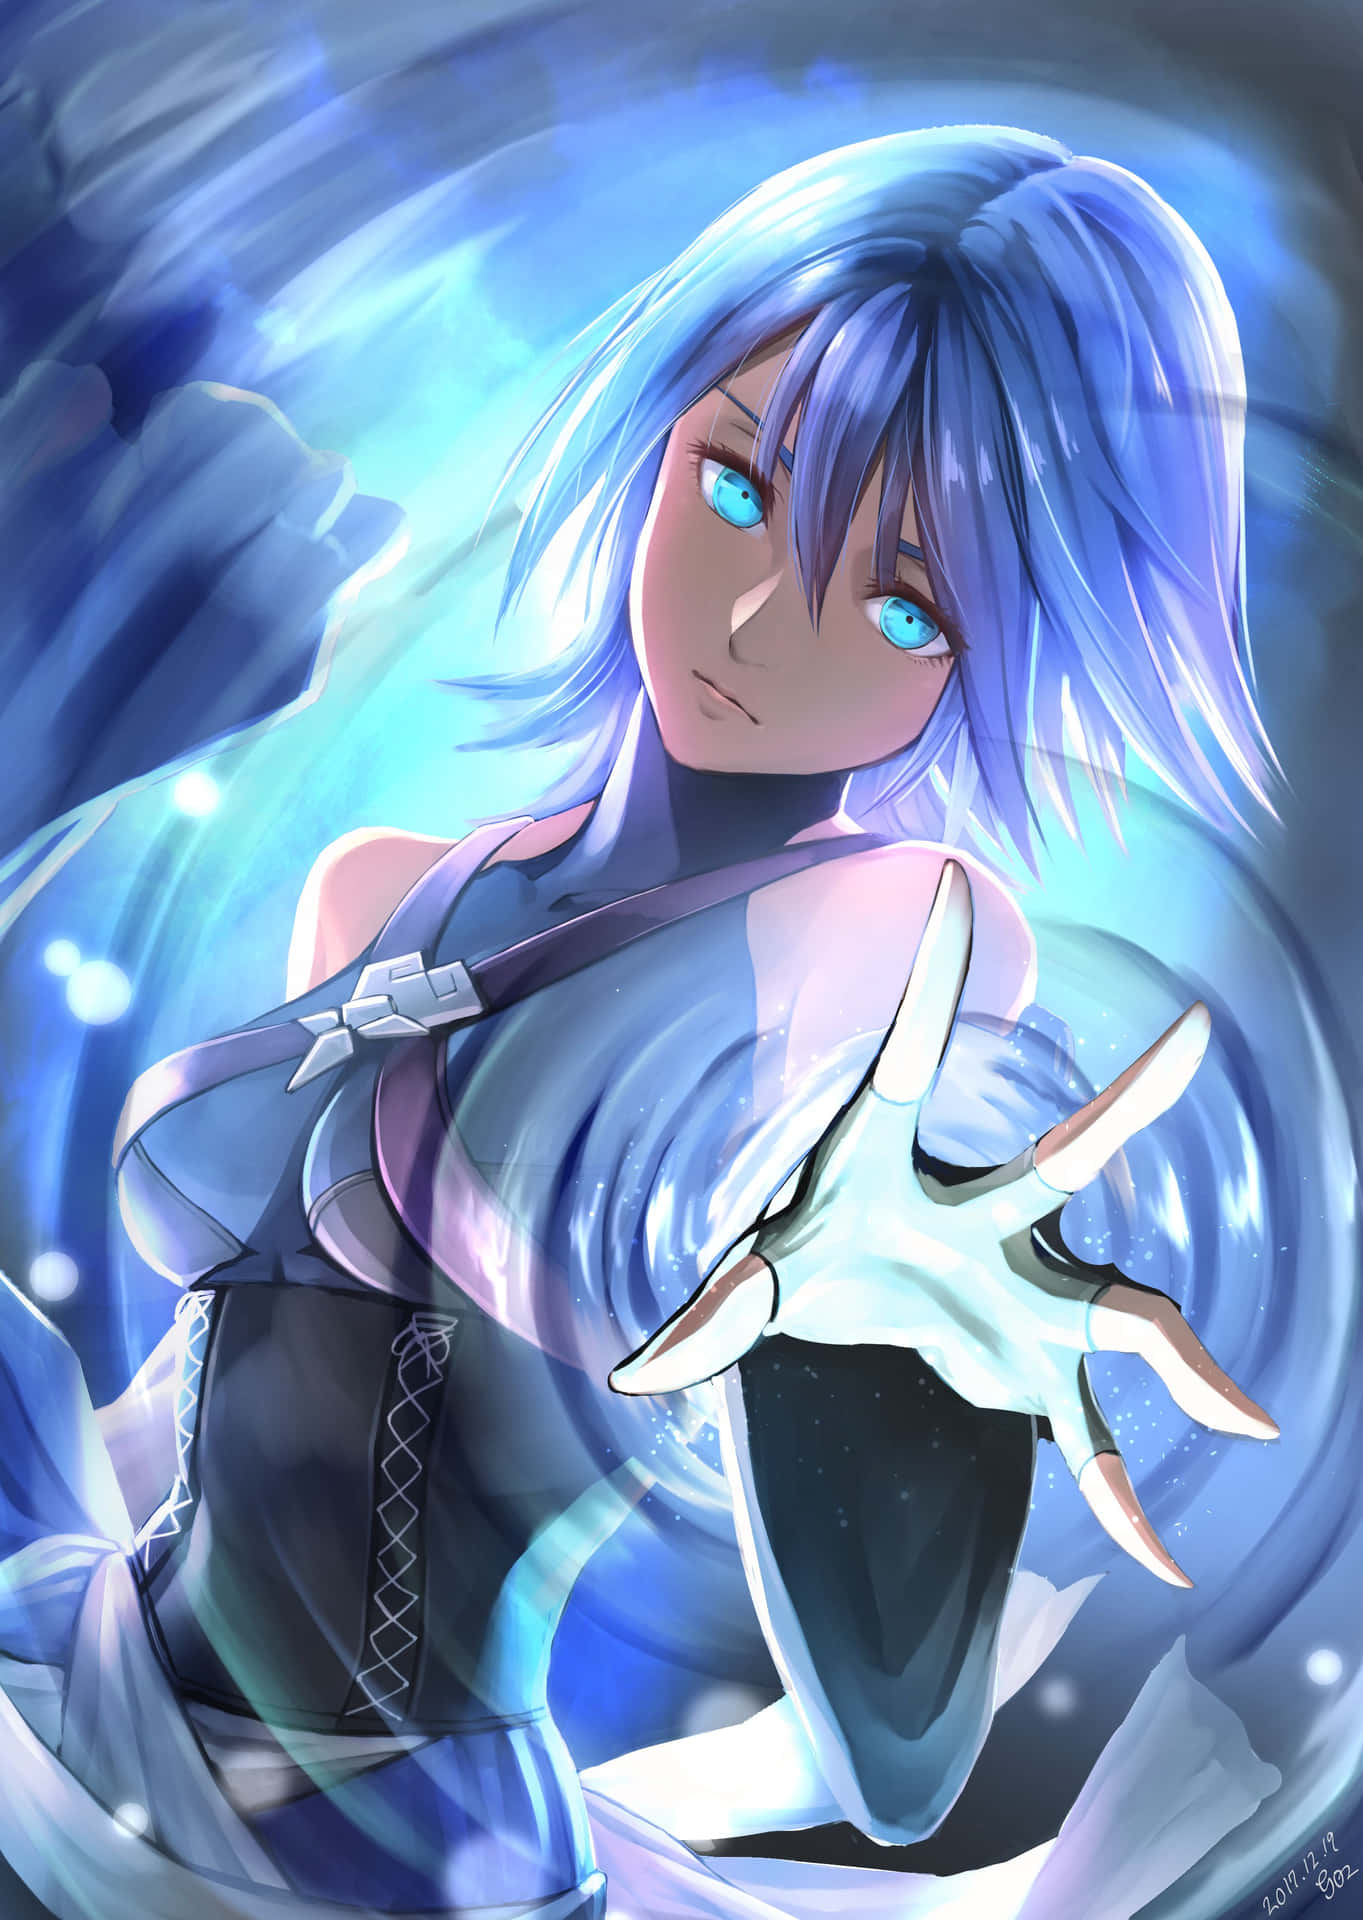 Aqua, a beloved protagonist from the Kingdom Hearts franchise. Wallpaper